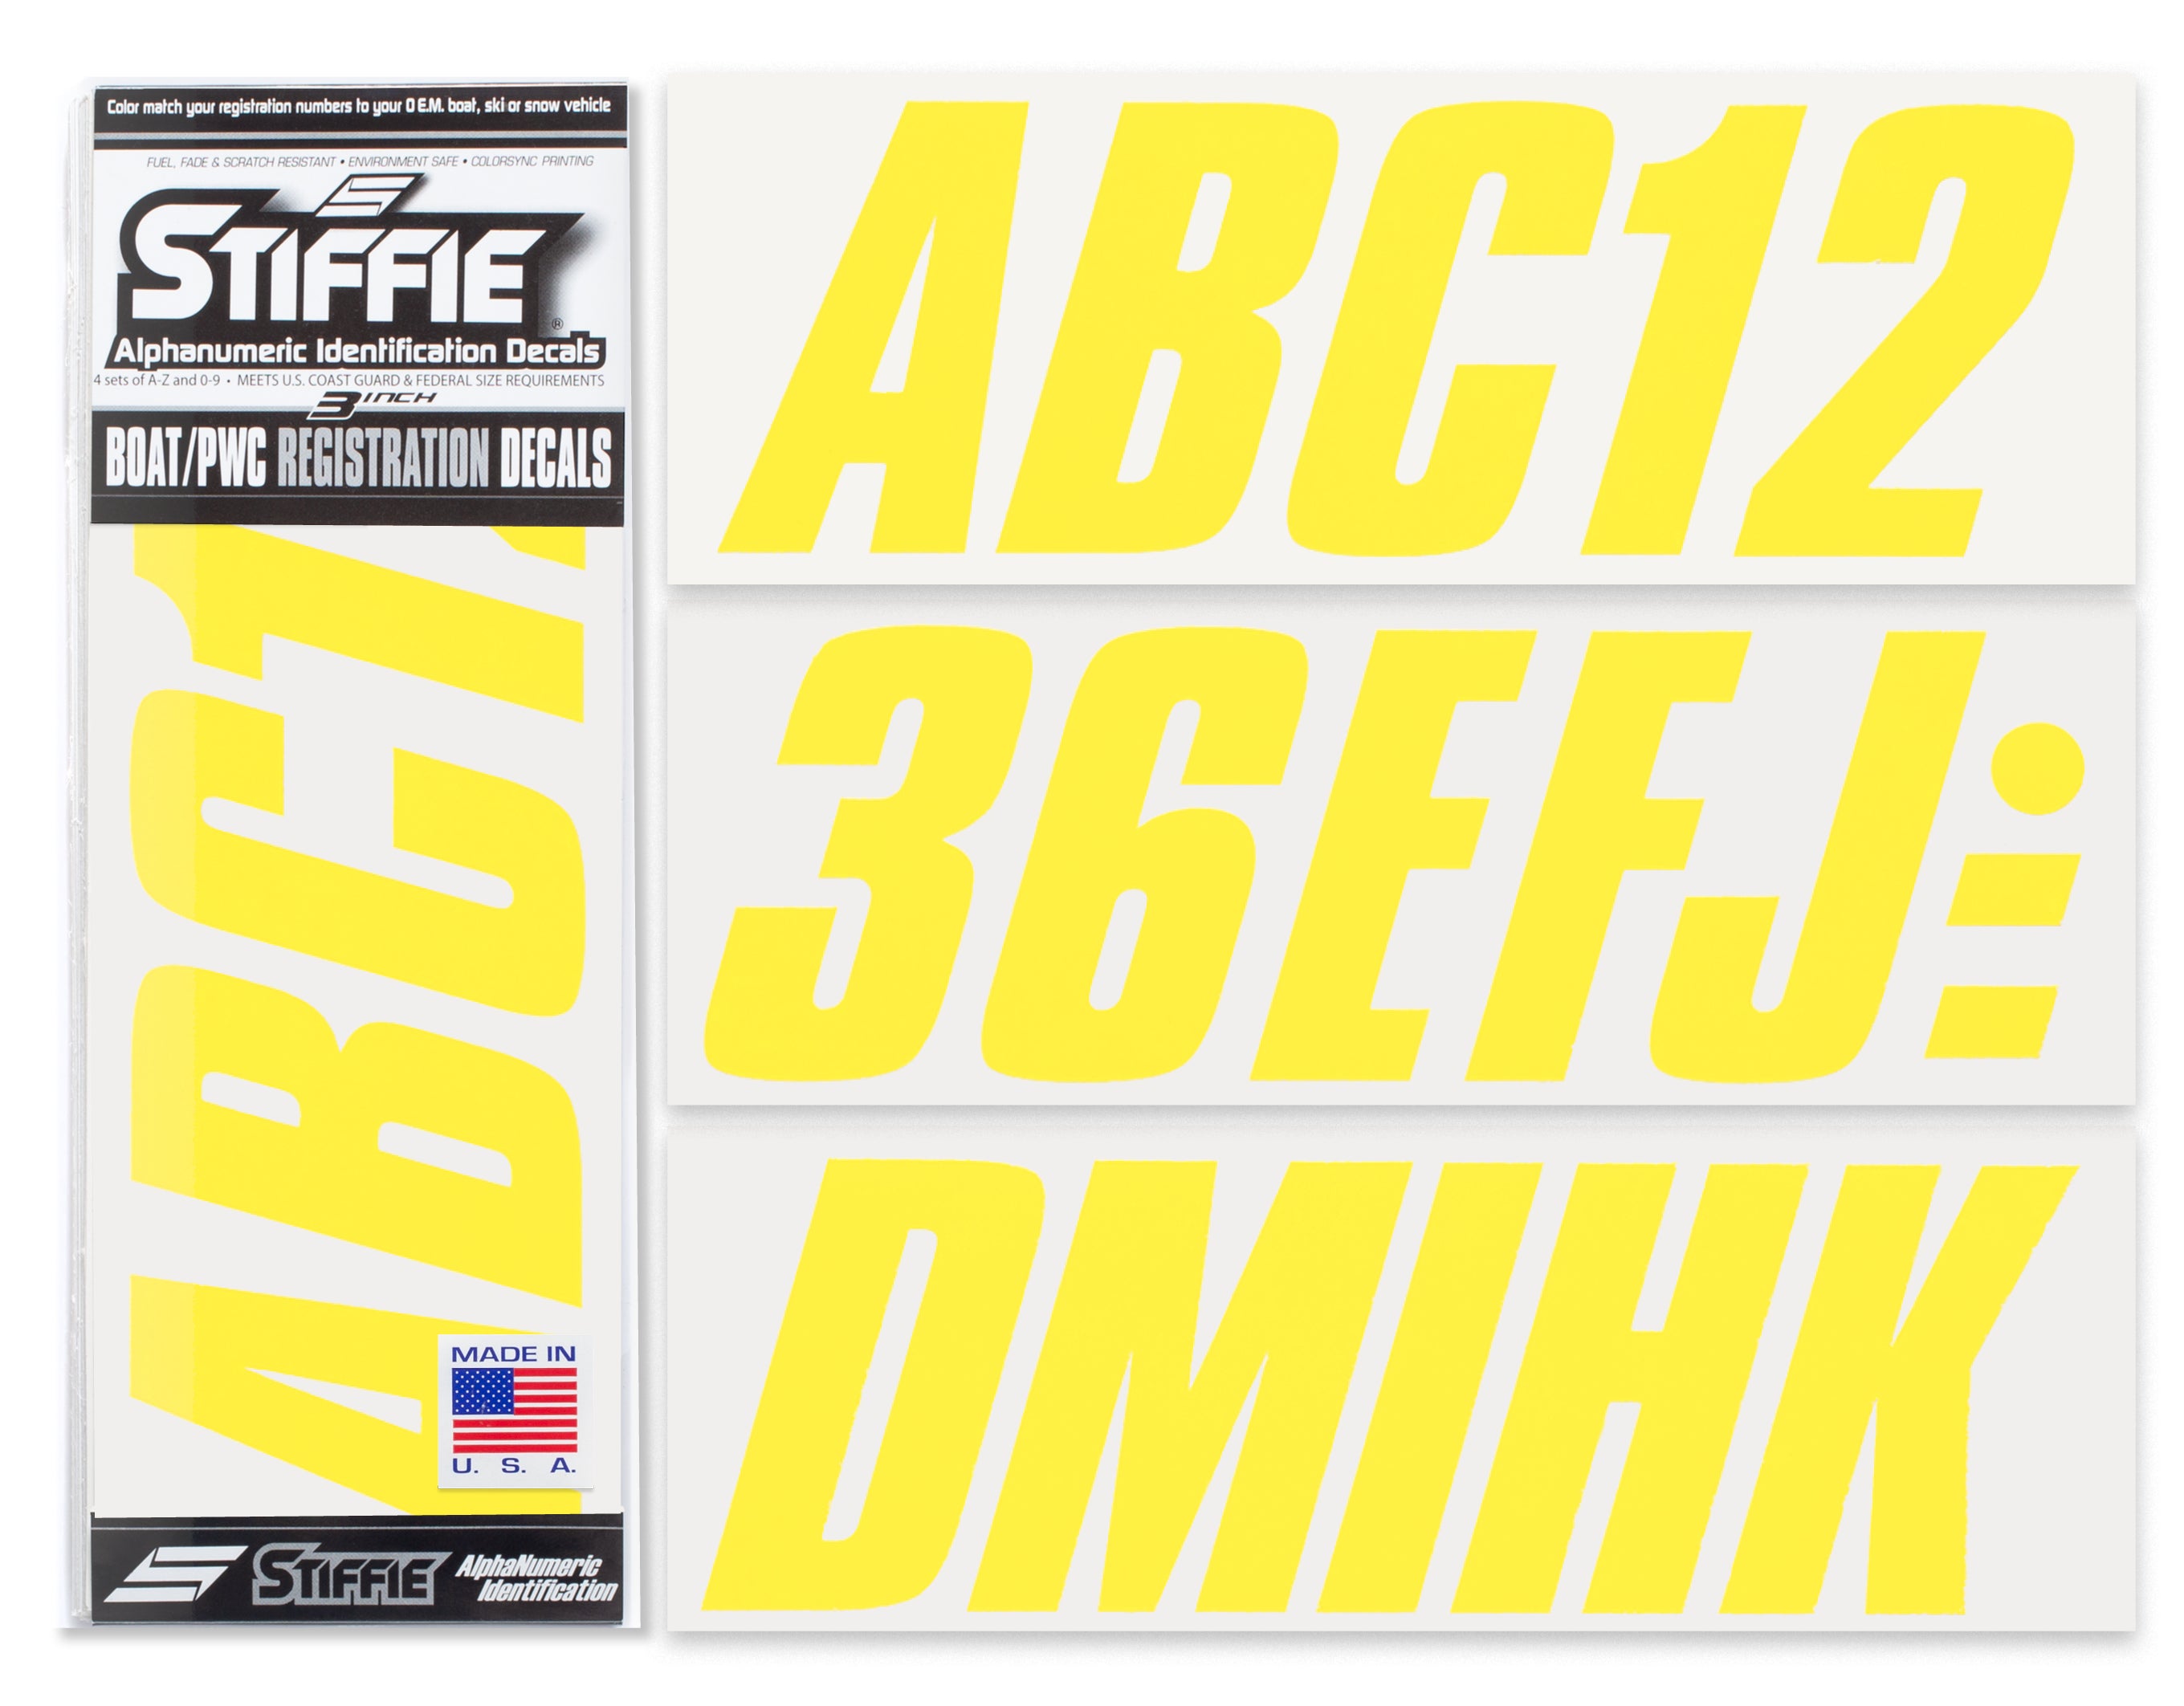 STIFFIE Shift Electric Yellow 3" ID Kit Alpha-Numeric Registration Identification Numbers Stickers Decals for Boats & Personal Watercraft